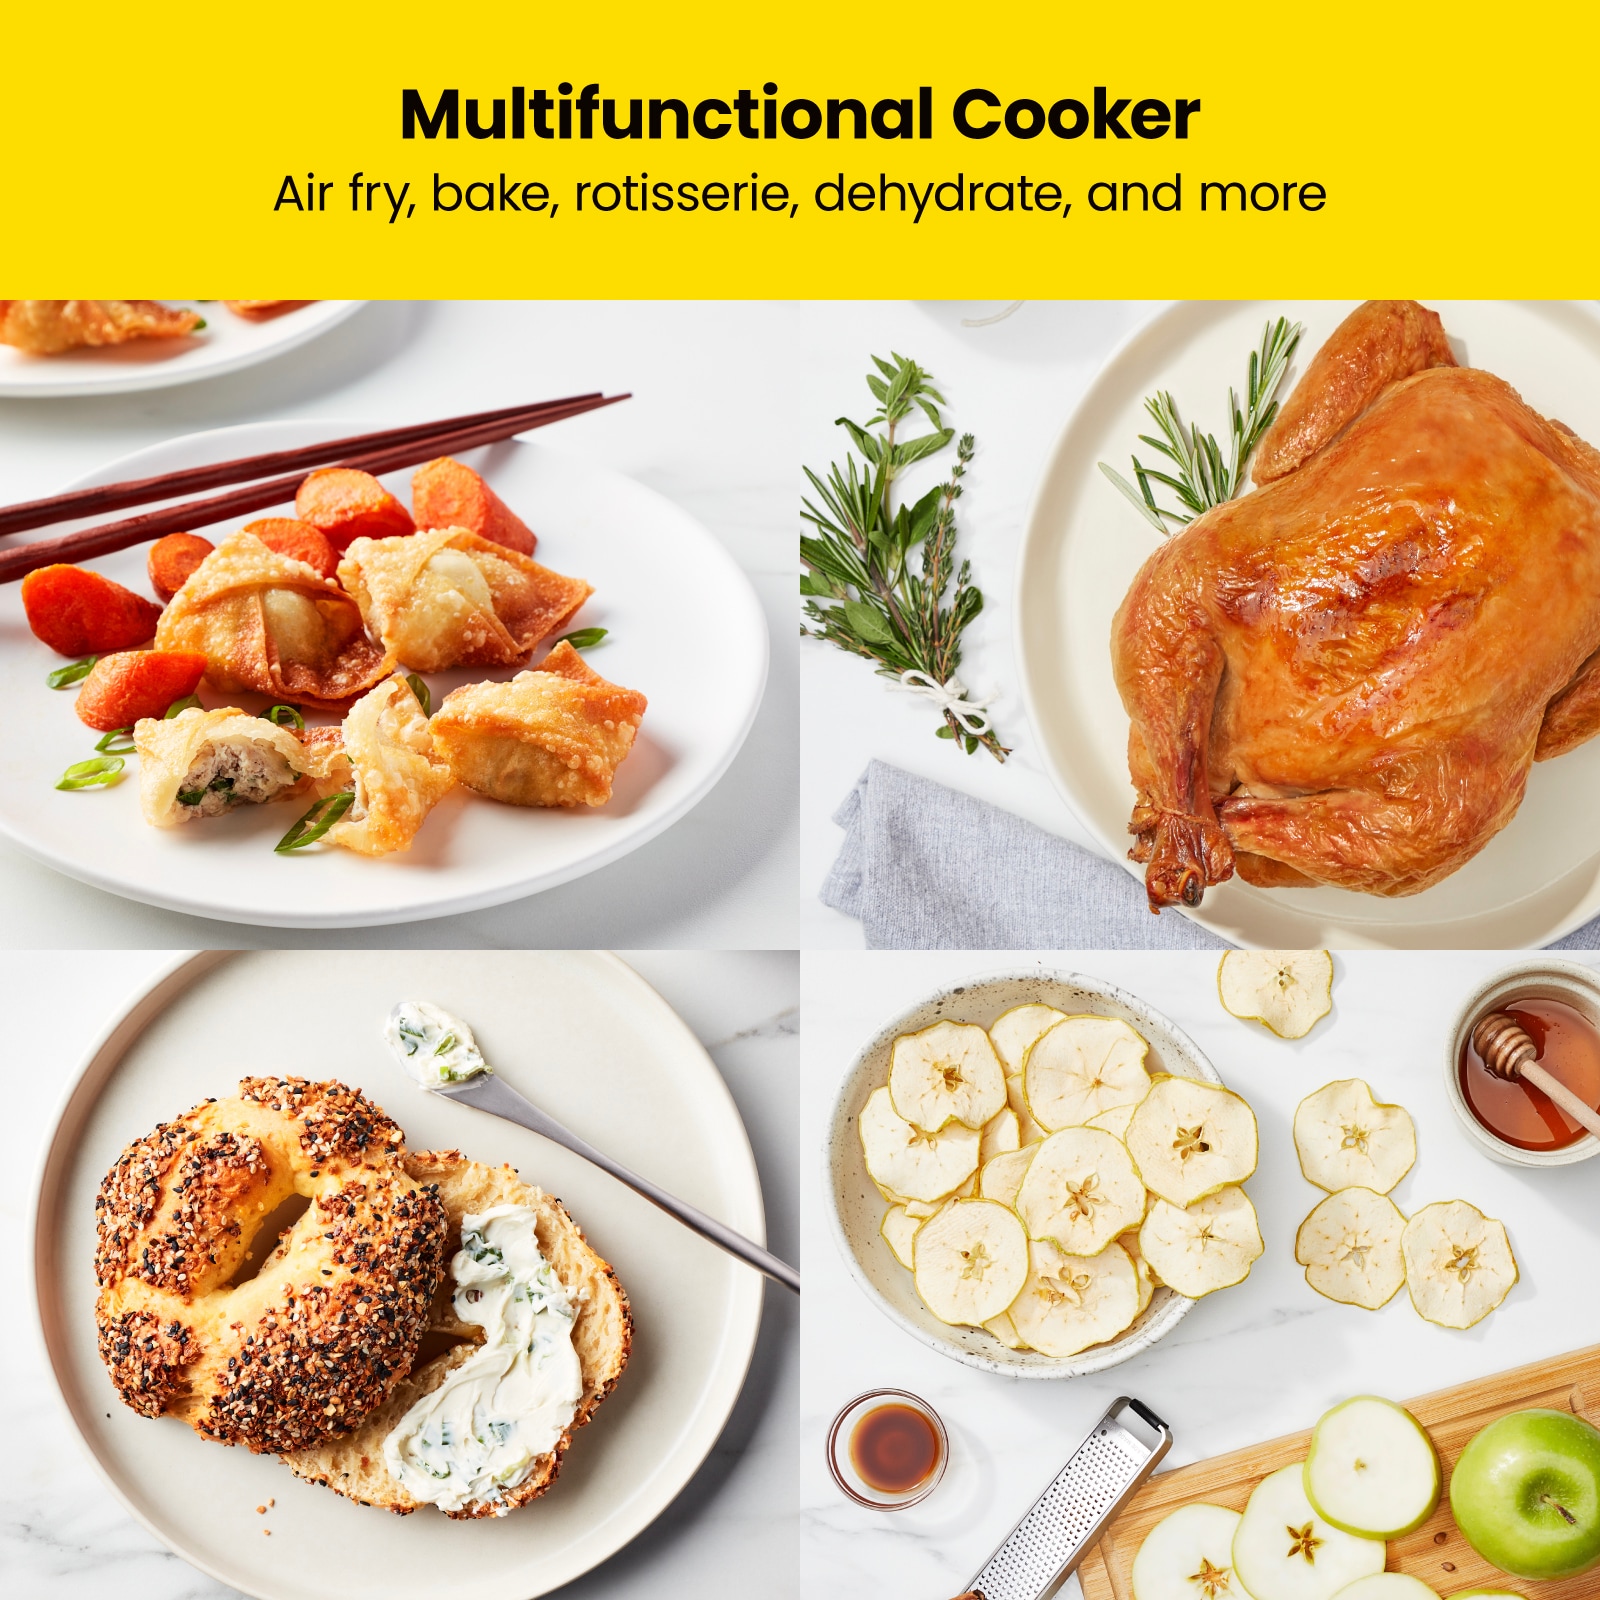 Multifunctional Cooking with Speed and Versatility